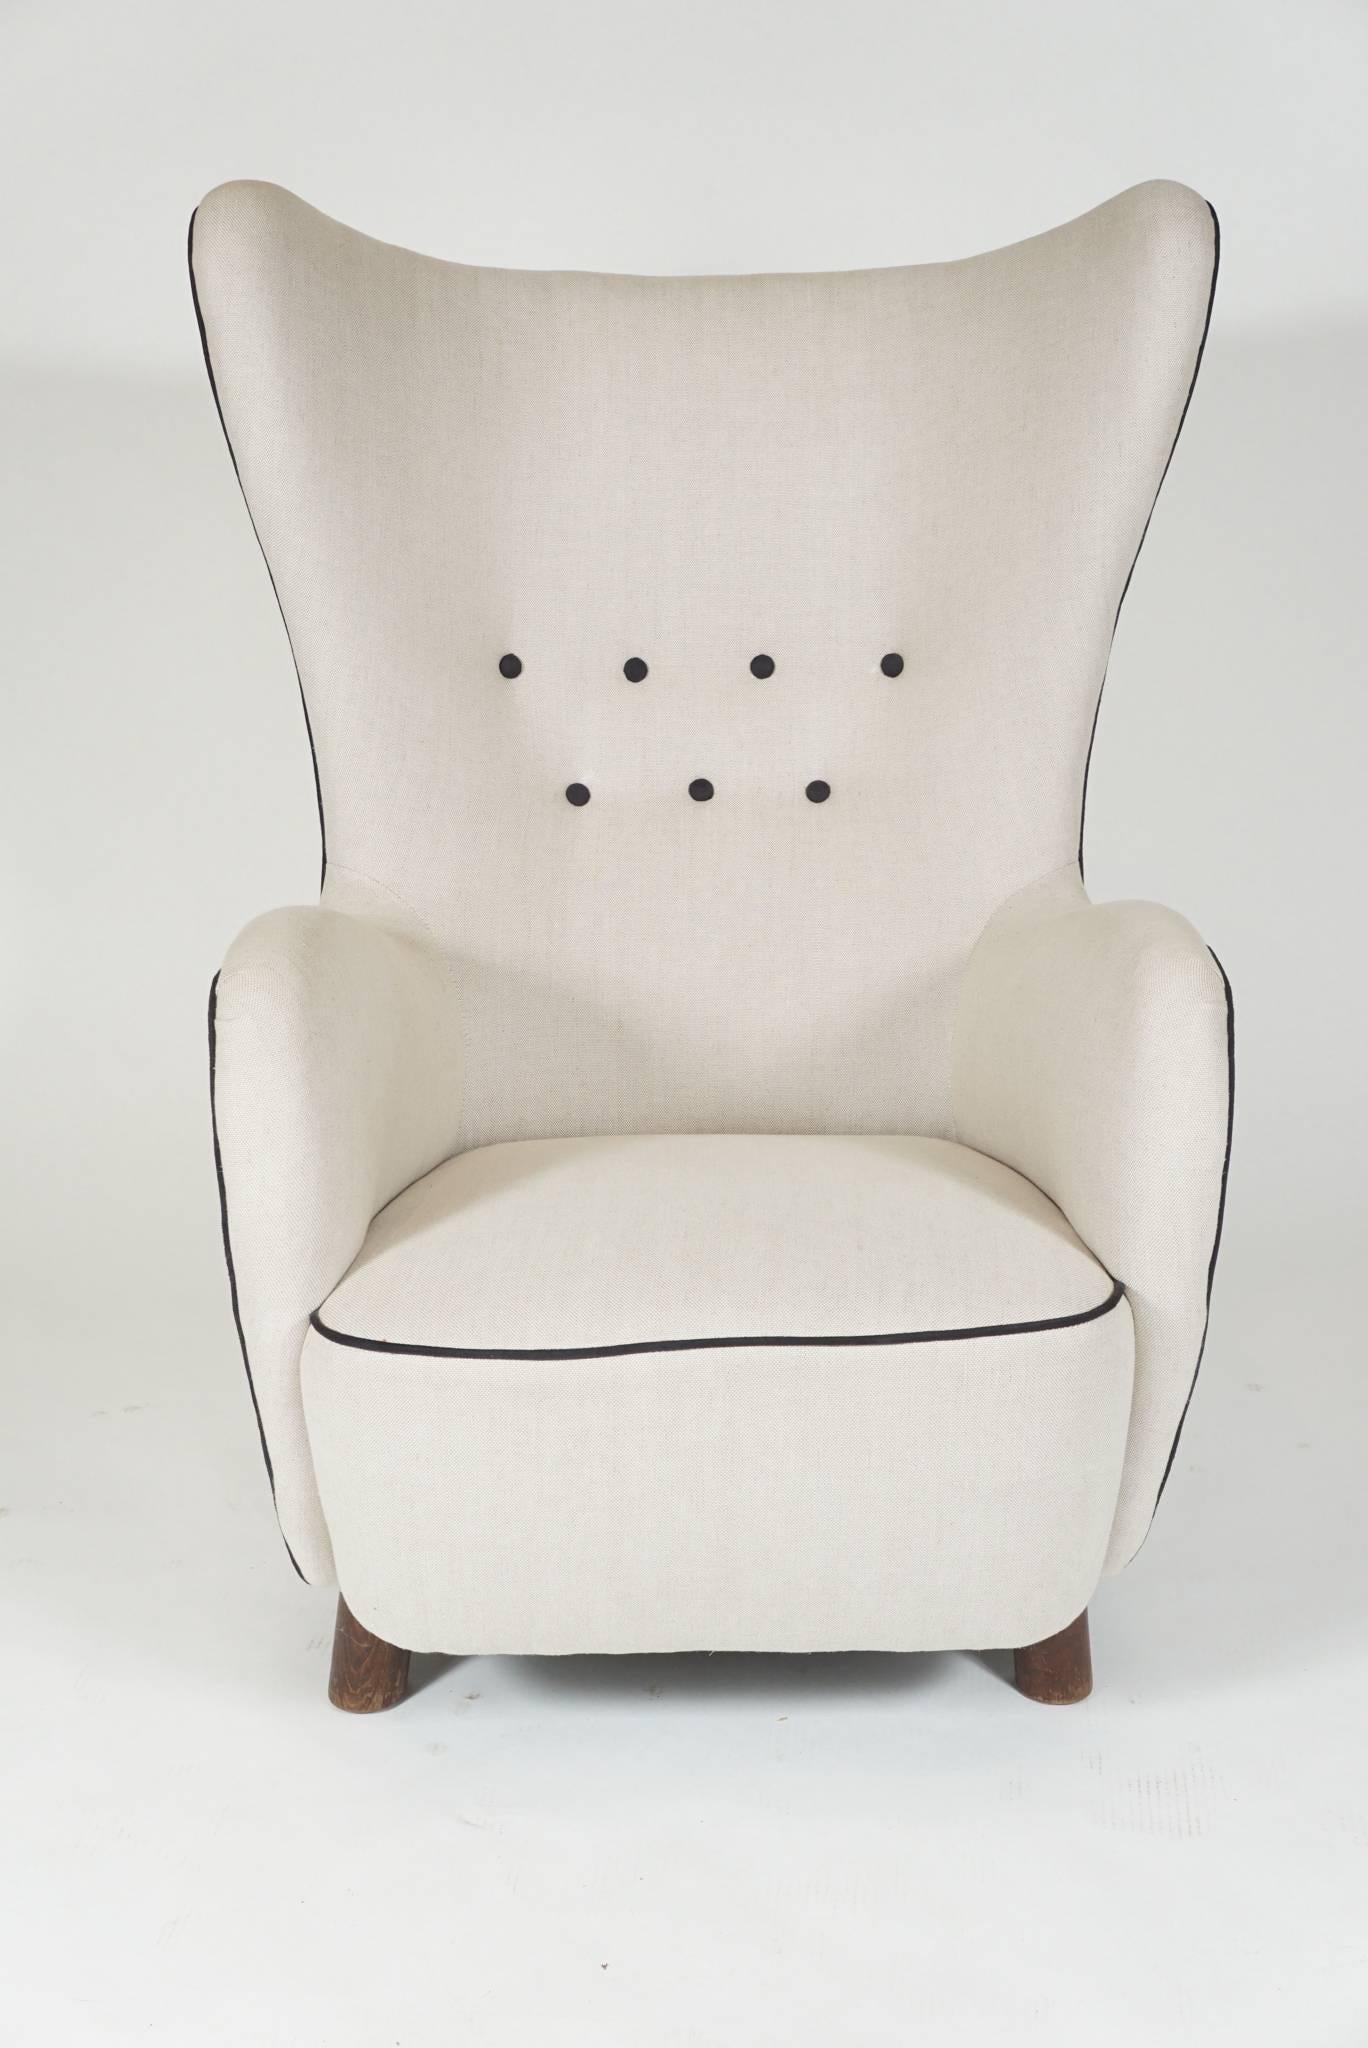 Wingback lounge chair by Mogens Lassen from Denmark, 1930s covered in white linen with black piping and buttoning.